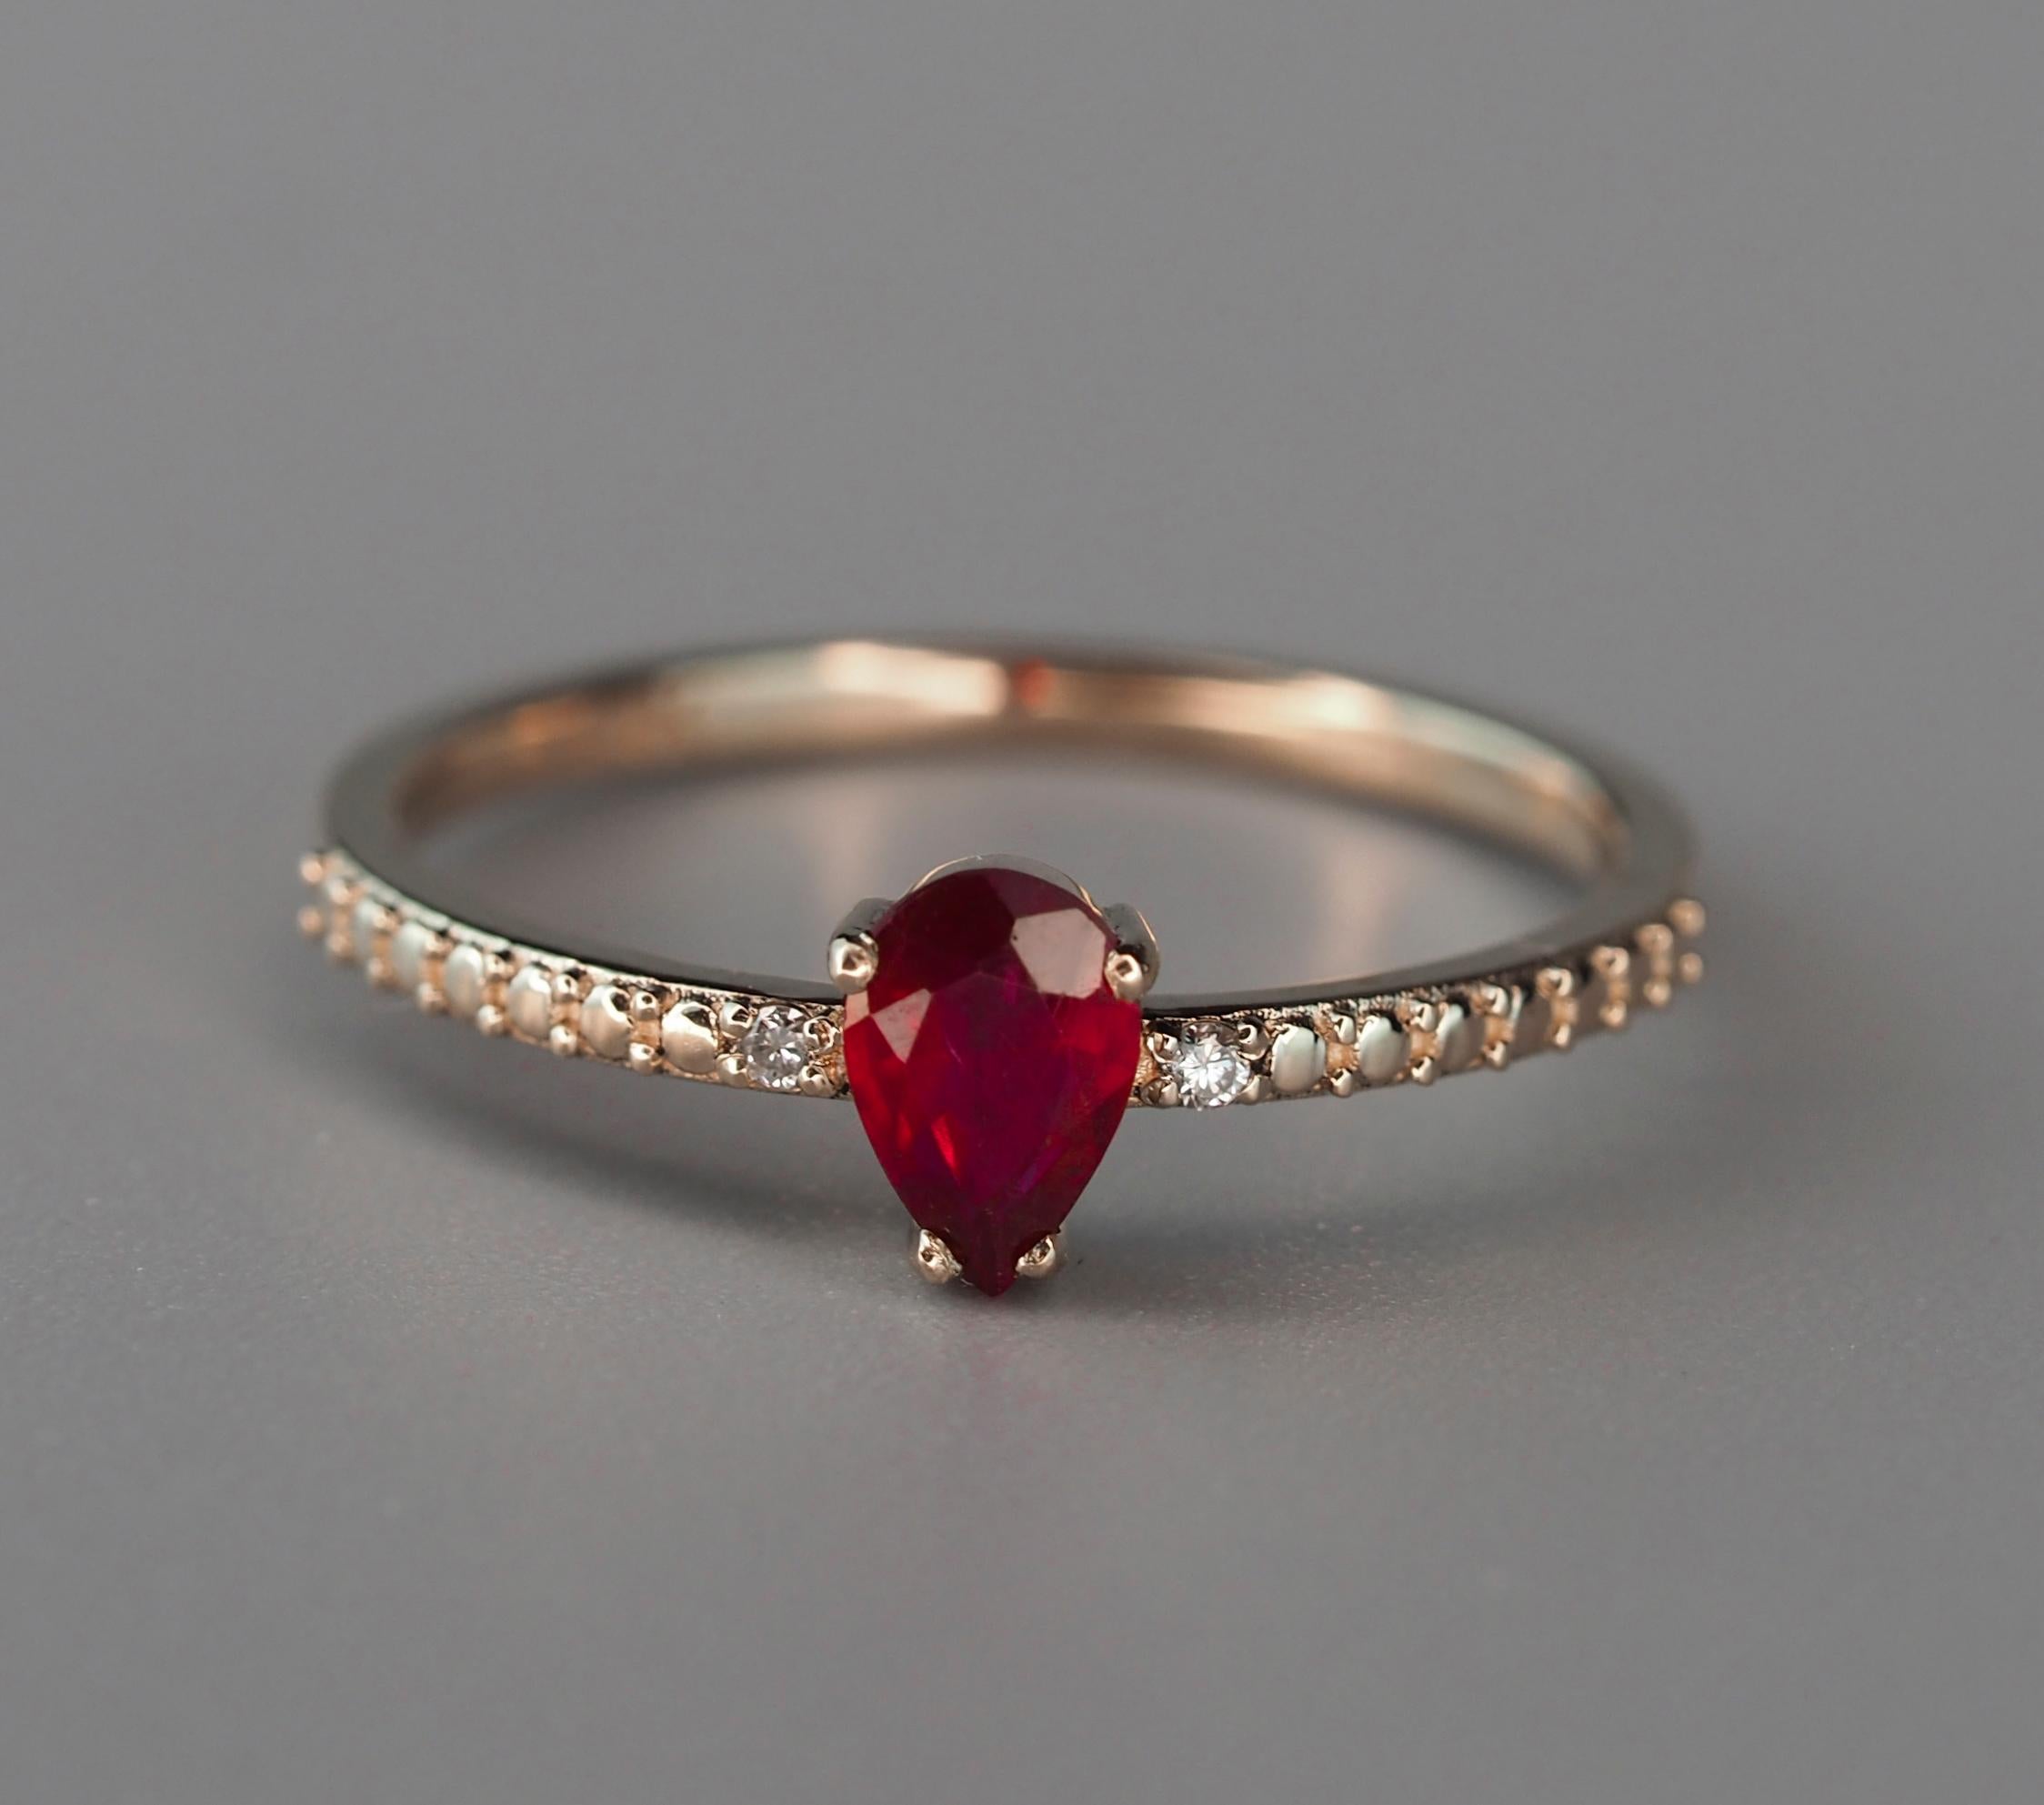 Ruby 14k gold ring. 
Genuine ruby ring. Red gemstone ring. Pear ruby ring. Ruby stackable ring. Minimalist ruby ring. July birthstone ring.

Metal: 14k gold
Weight: 1.6 g. depends from size.

Set with ruby, color - red
Pear cut, apc 0.70 ct. in